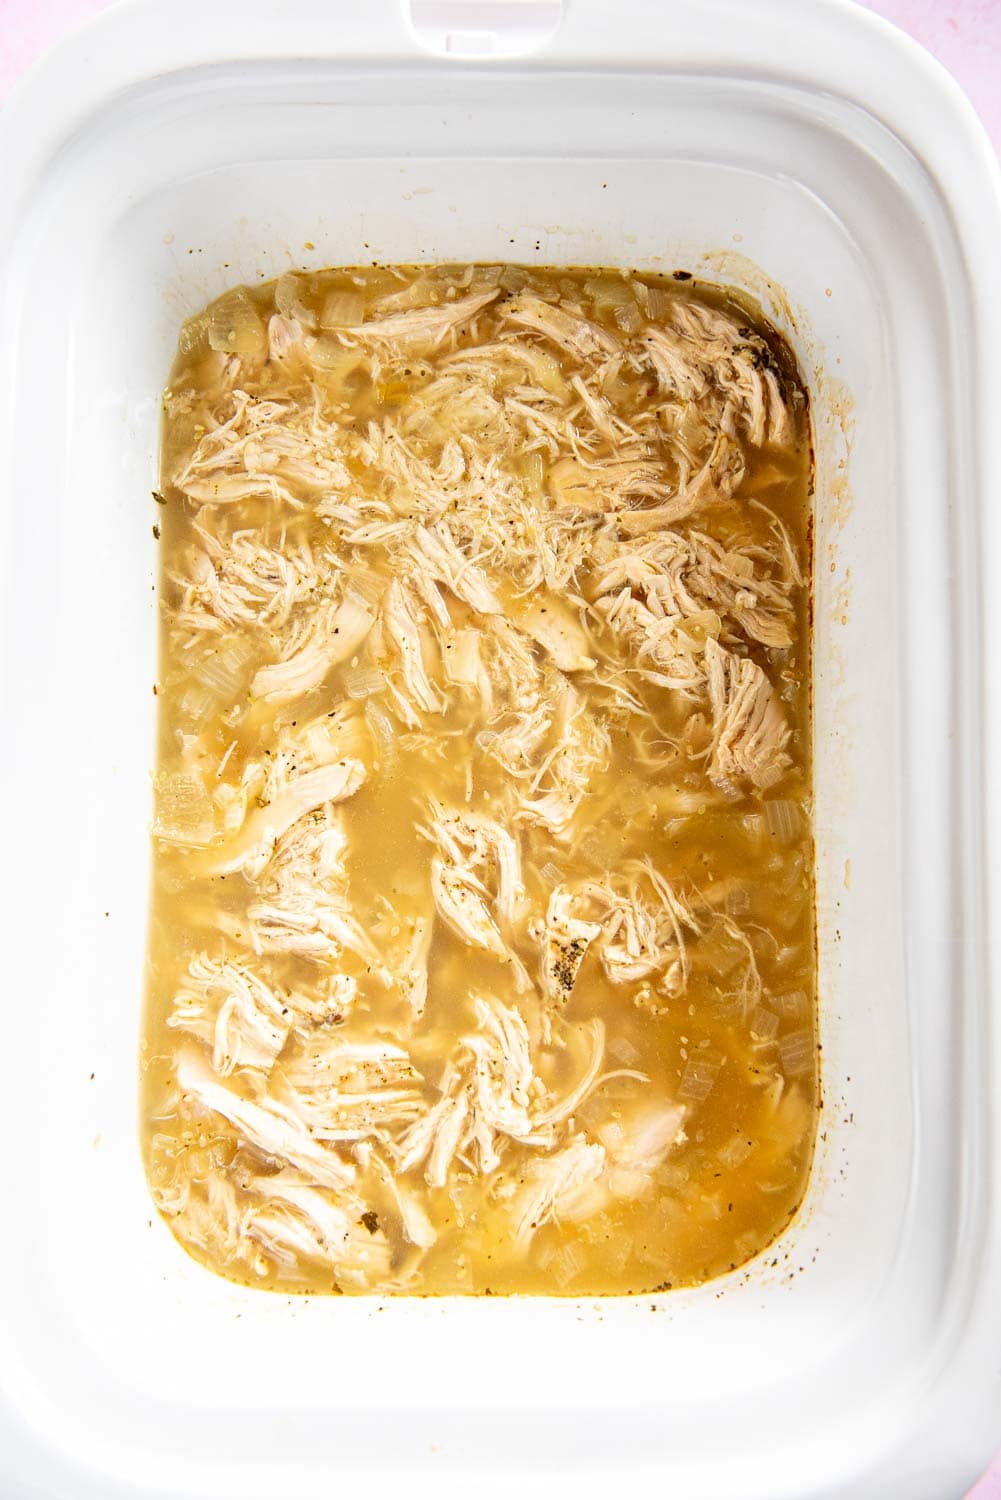 shredded chicken in a soup brown mixture in a white bowl